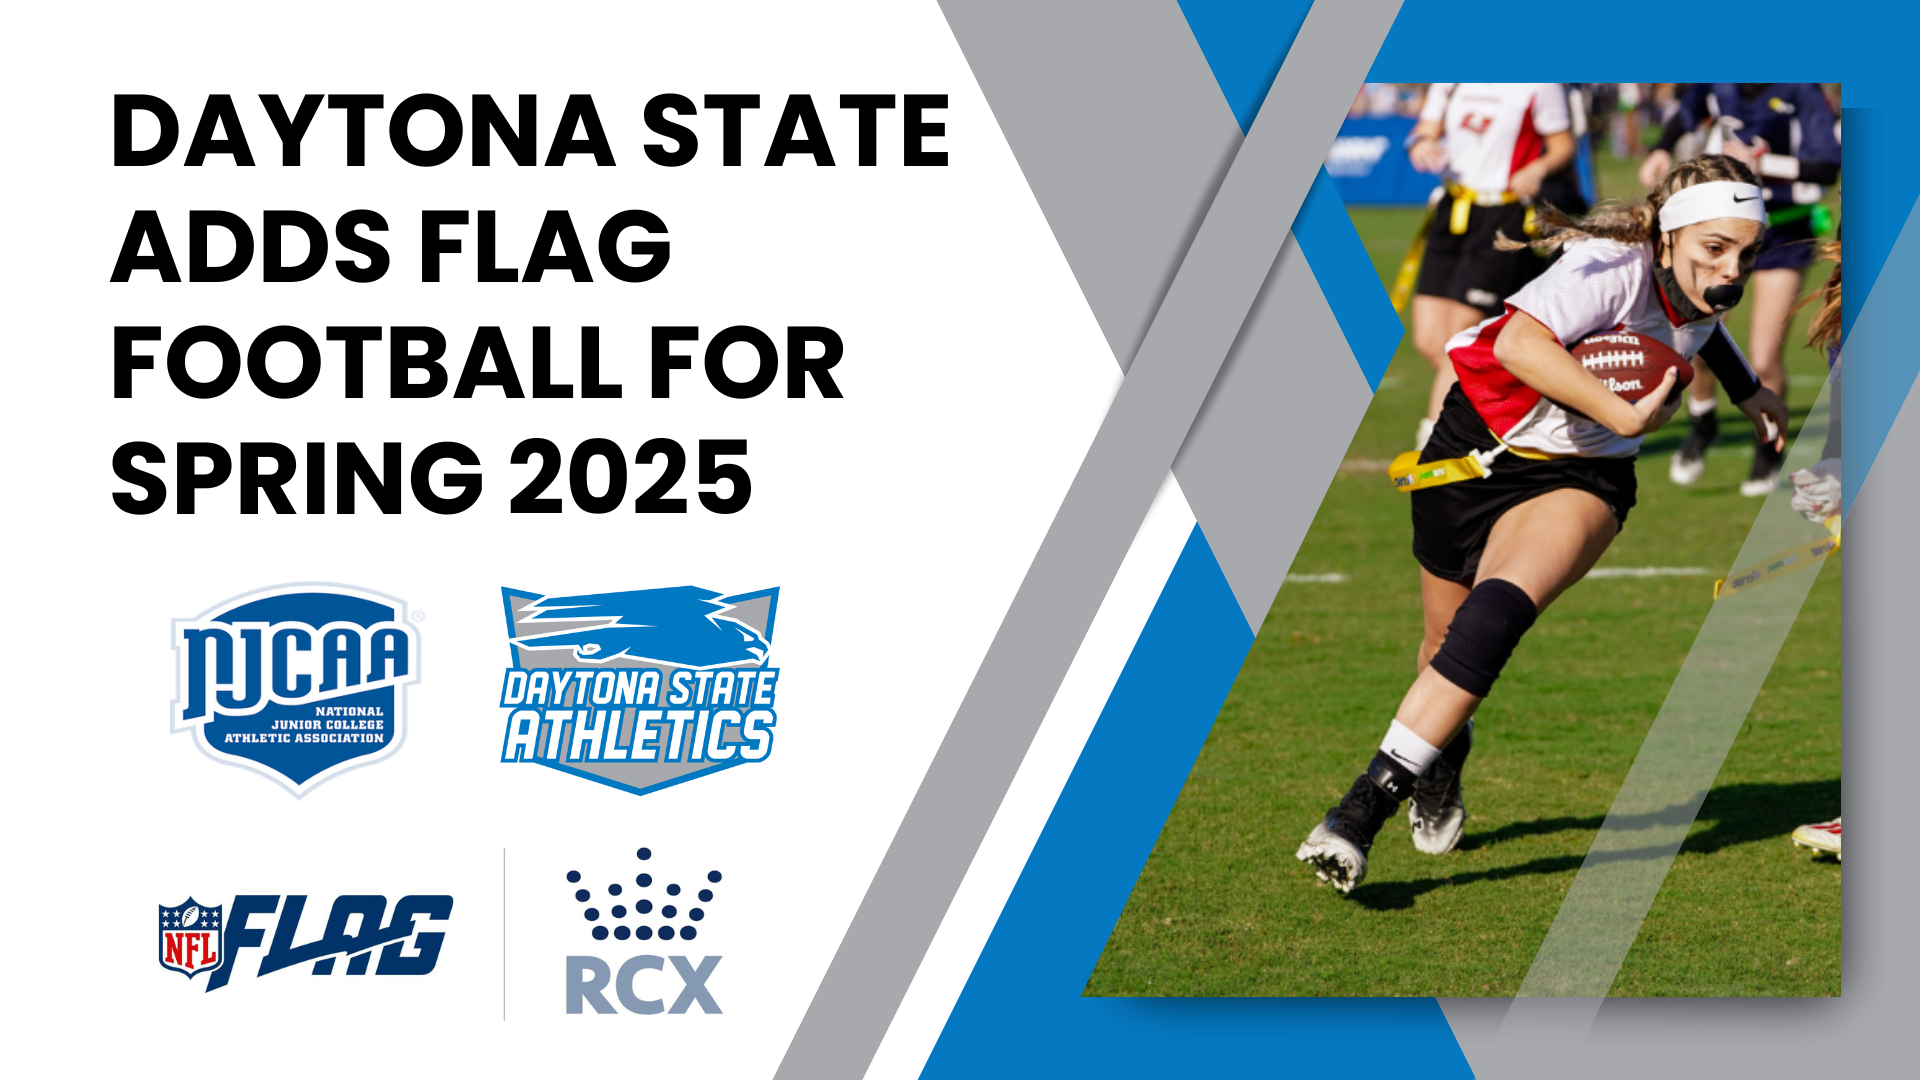 Daytona State College announces addition of women&rsquo;s flag football as an intercollegiate sport